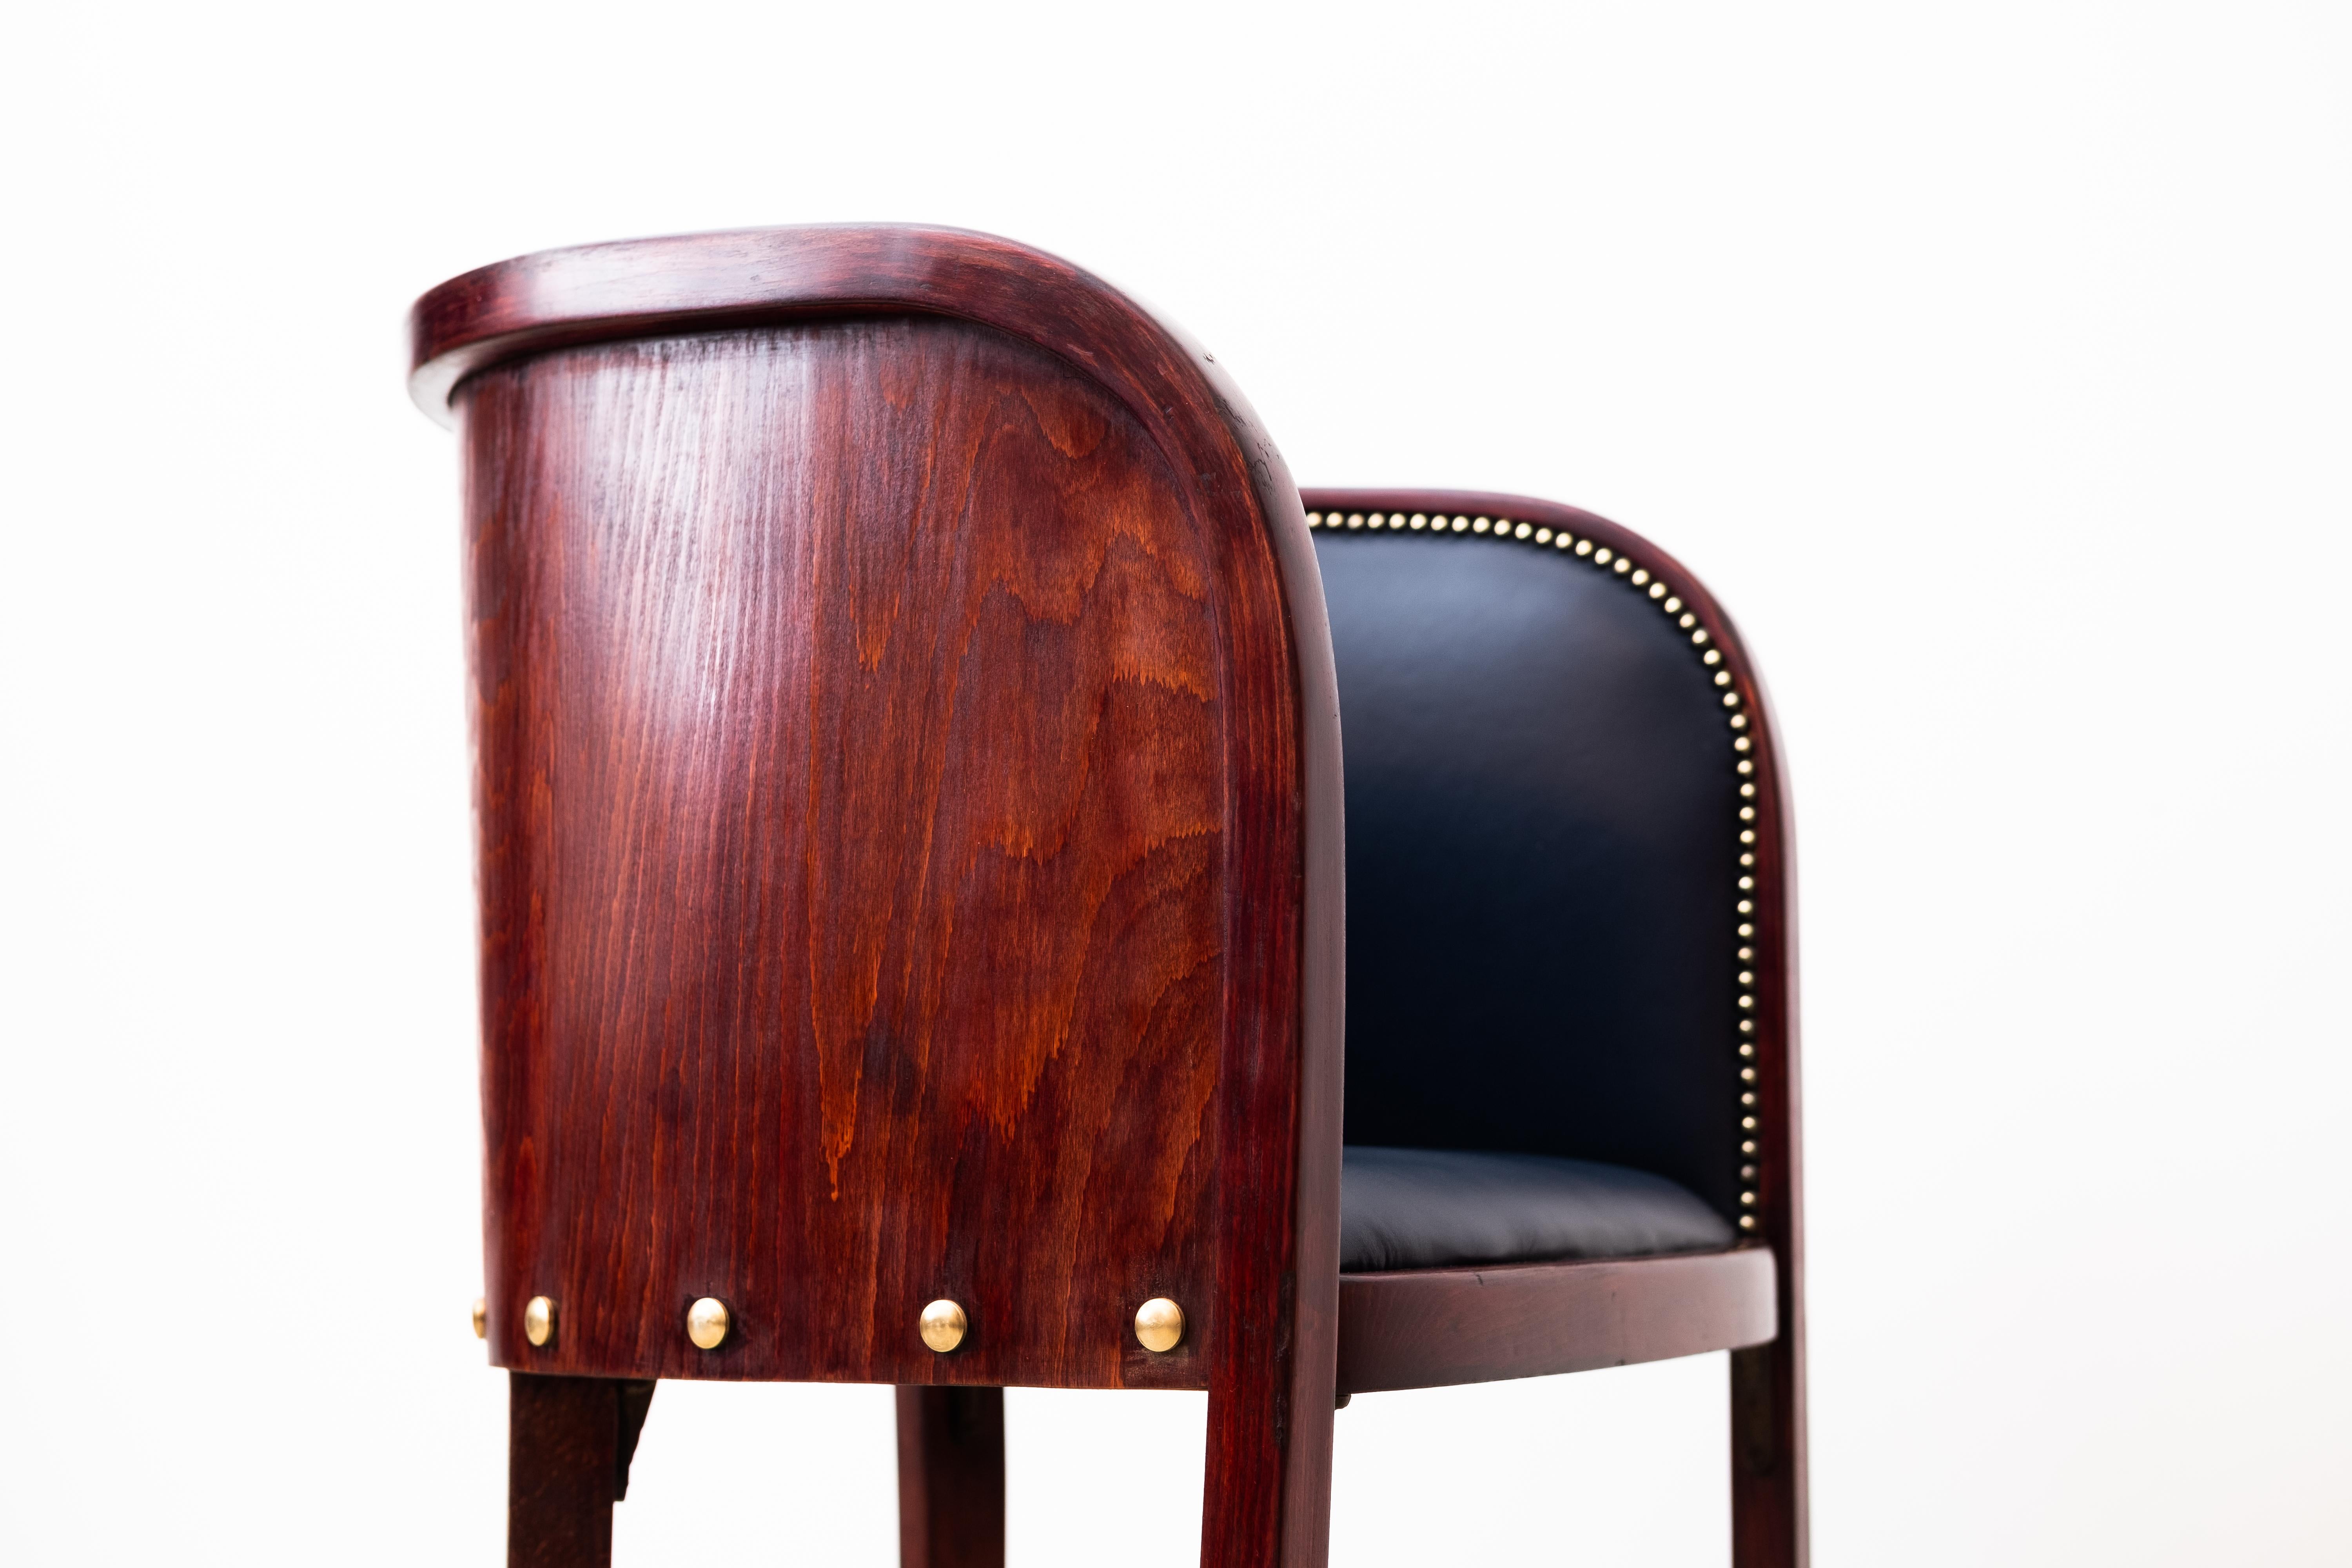 Secession Armchair by Josef Hoffmann (1914), manufactured by Thonet (1919) 8